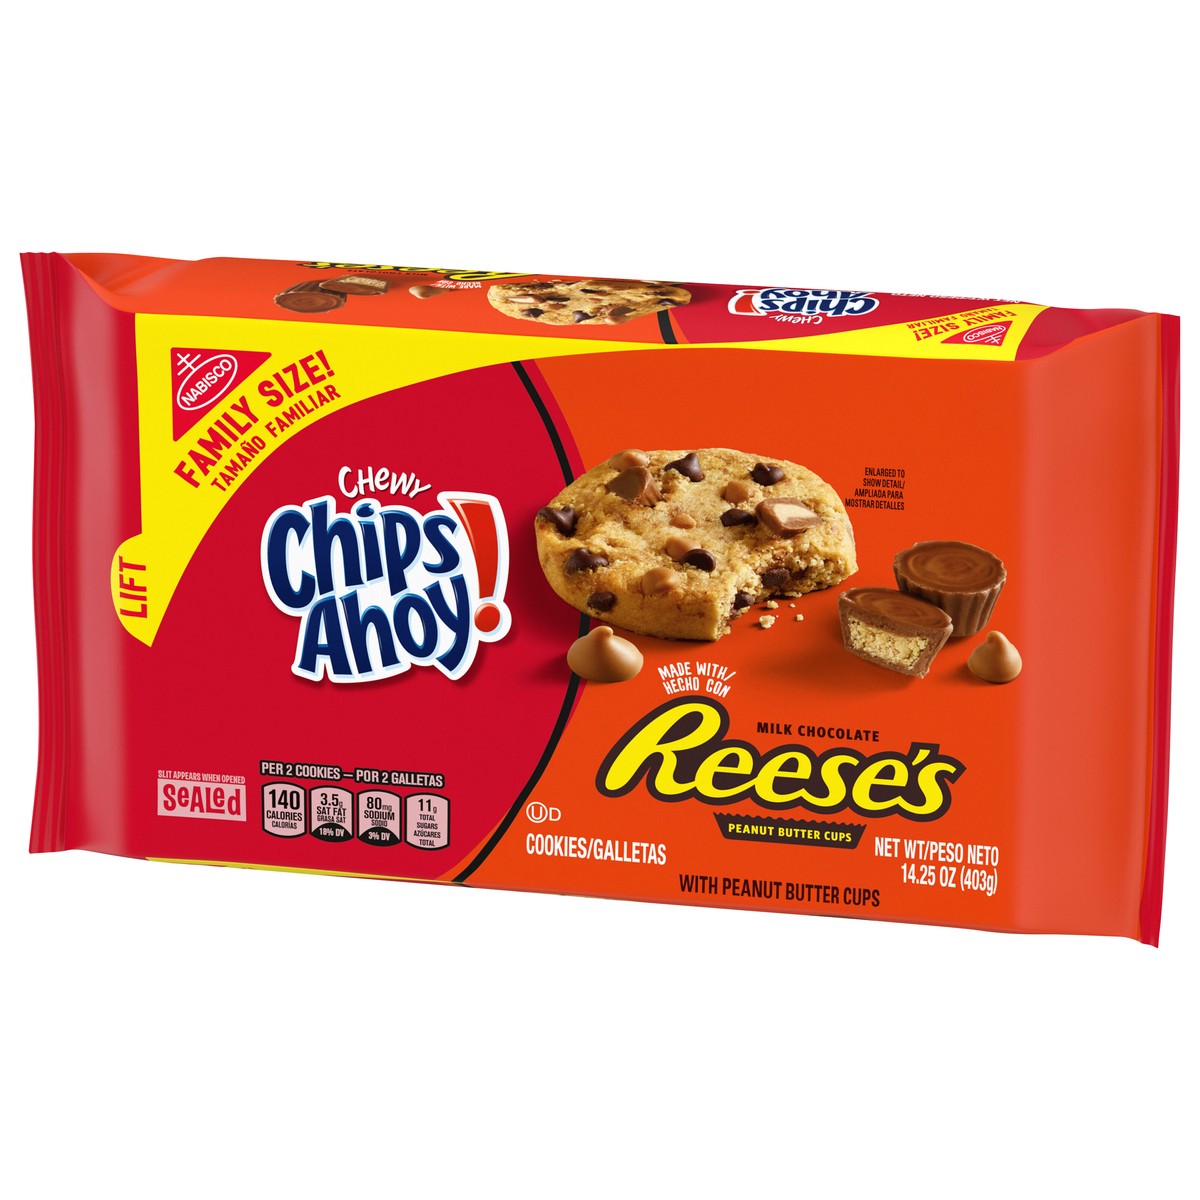 slide 8 of 15, CHIPS AHOY! Chewy Chocolate Chip Cookies with Reese's Peanut Butter Cups, Family Size, 14.25 oz, 14.25 oz